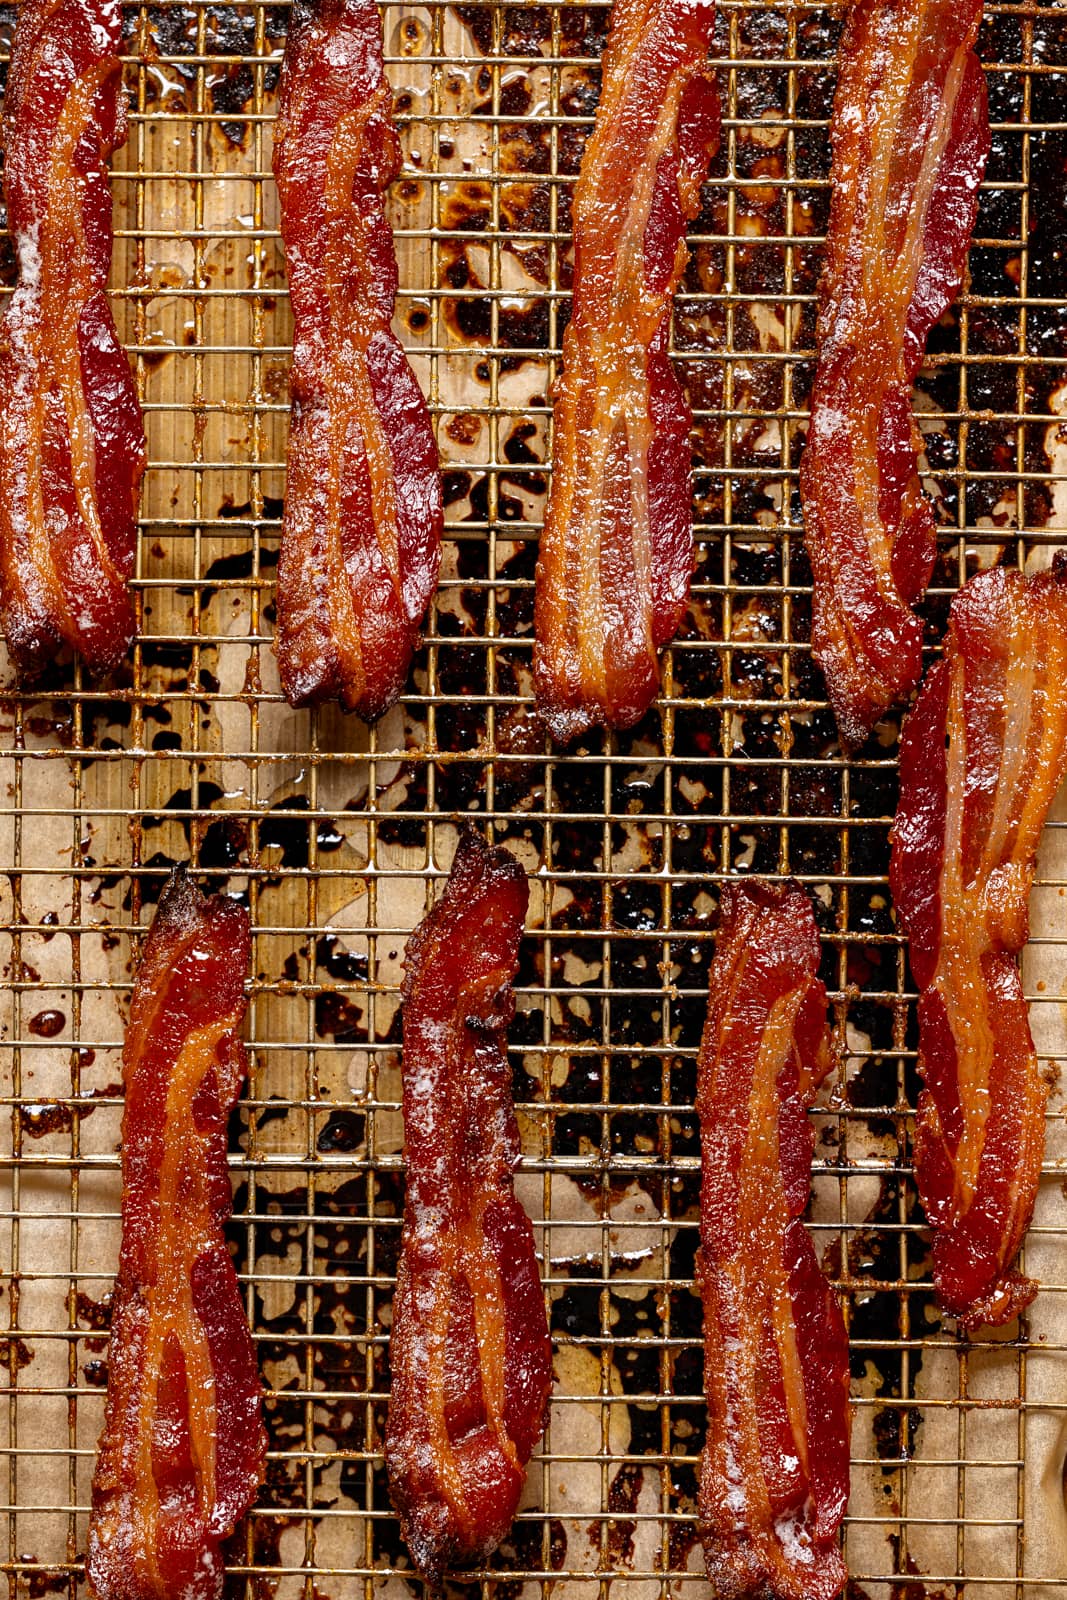 The Simple Trick To Keep Bacon From Sticking To A Wire Rack